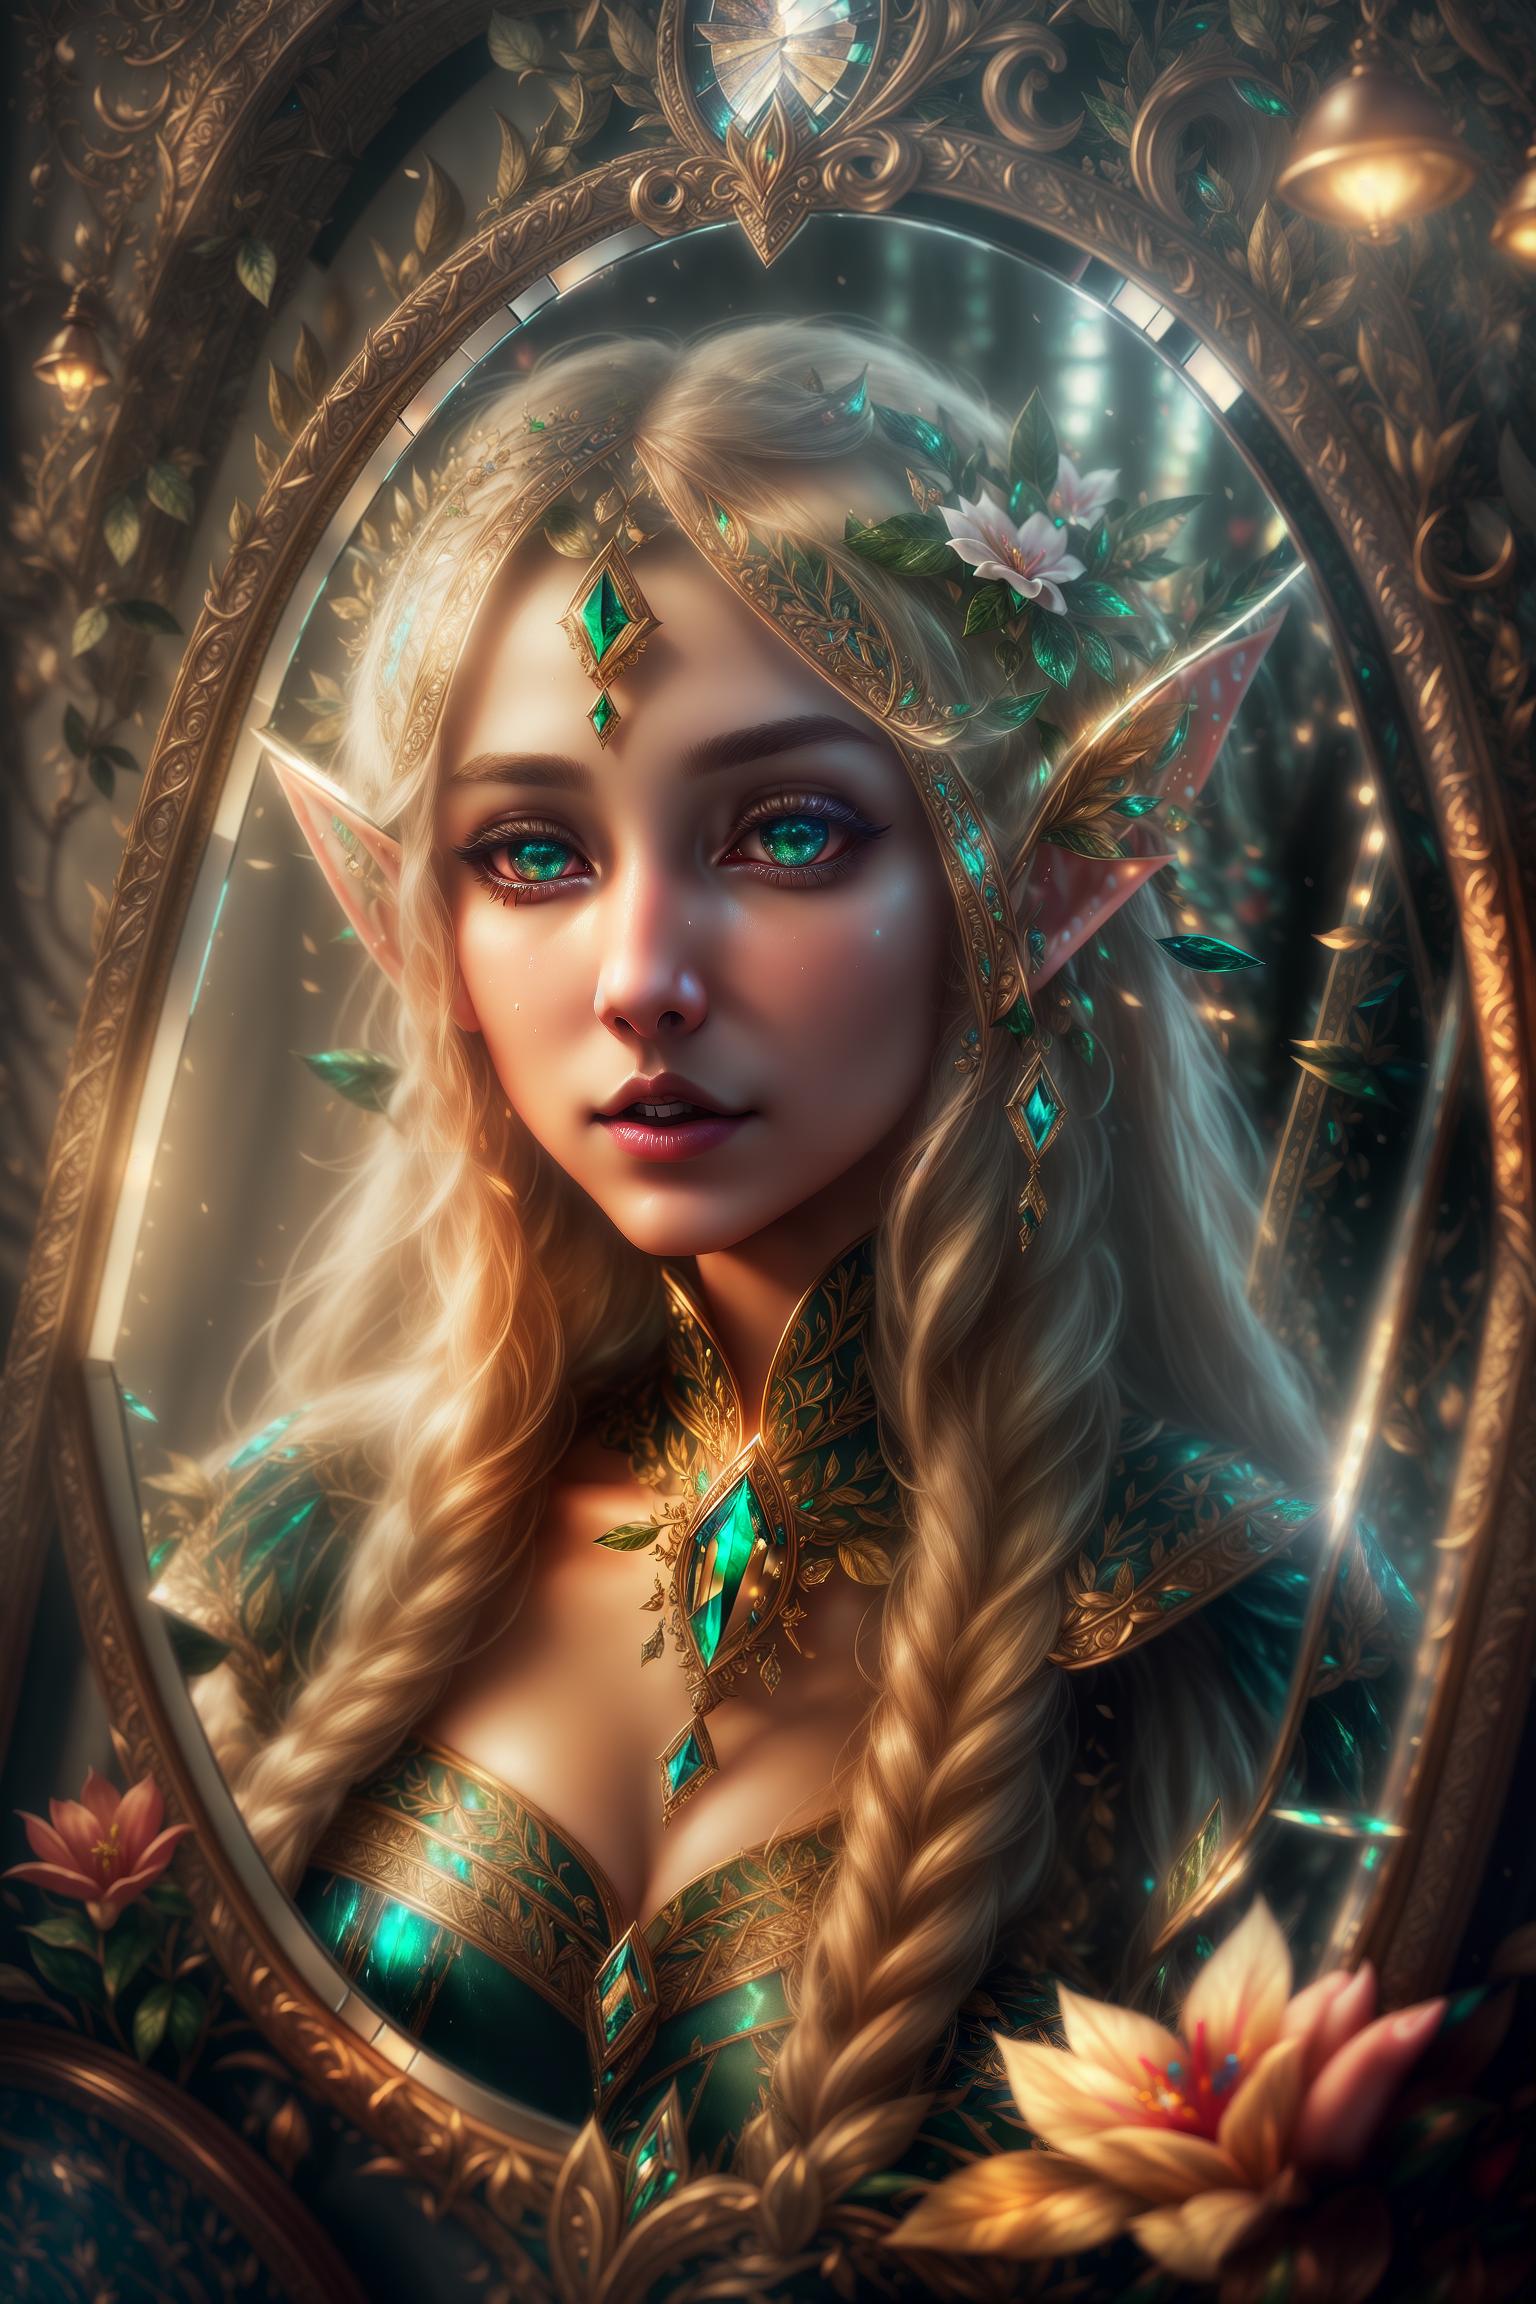  masterpiece,(bestquality),highlydetailed,(beautiful elf:1.5),(narcissistic expression:1.2),(lifedrain:1.3),{reflection in the mirror: trapped in the mirror:1.2},(ancient mirror:1.5),(attracted person:0.8),{dark environment: mysterious atmosphere:1.1},(mirror reflection:1.3),{elf elements: forest: mushrooms: flowers:1.2} hyperrealistic, full body, detailed clothing, highly detailed, cinematic lighting, stunningly beautiful, intricate, sharp focus, f/1. 8, 85mm, (centered image composition), (professionally color graded), ((bright soft diffused light)), volumetric fog, trending on instagram, trending on tumblr, HDR 4K, 8K